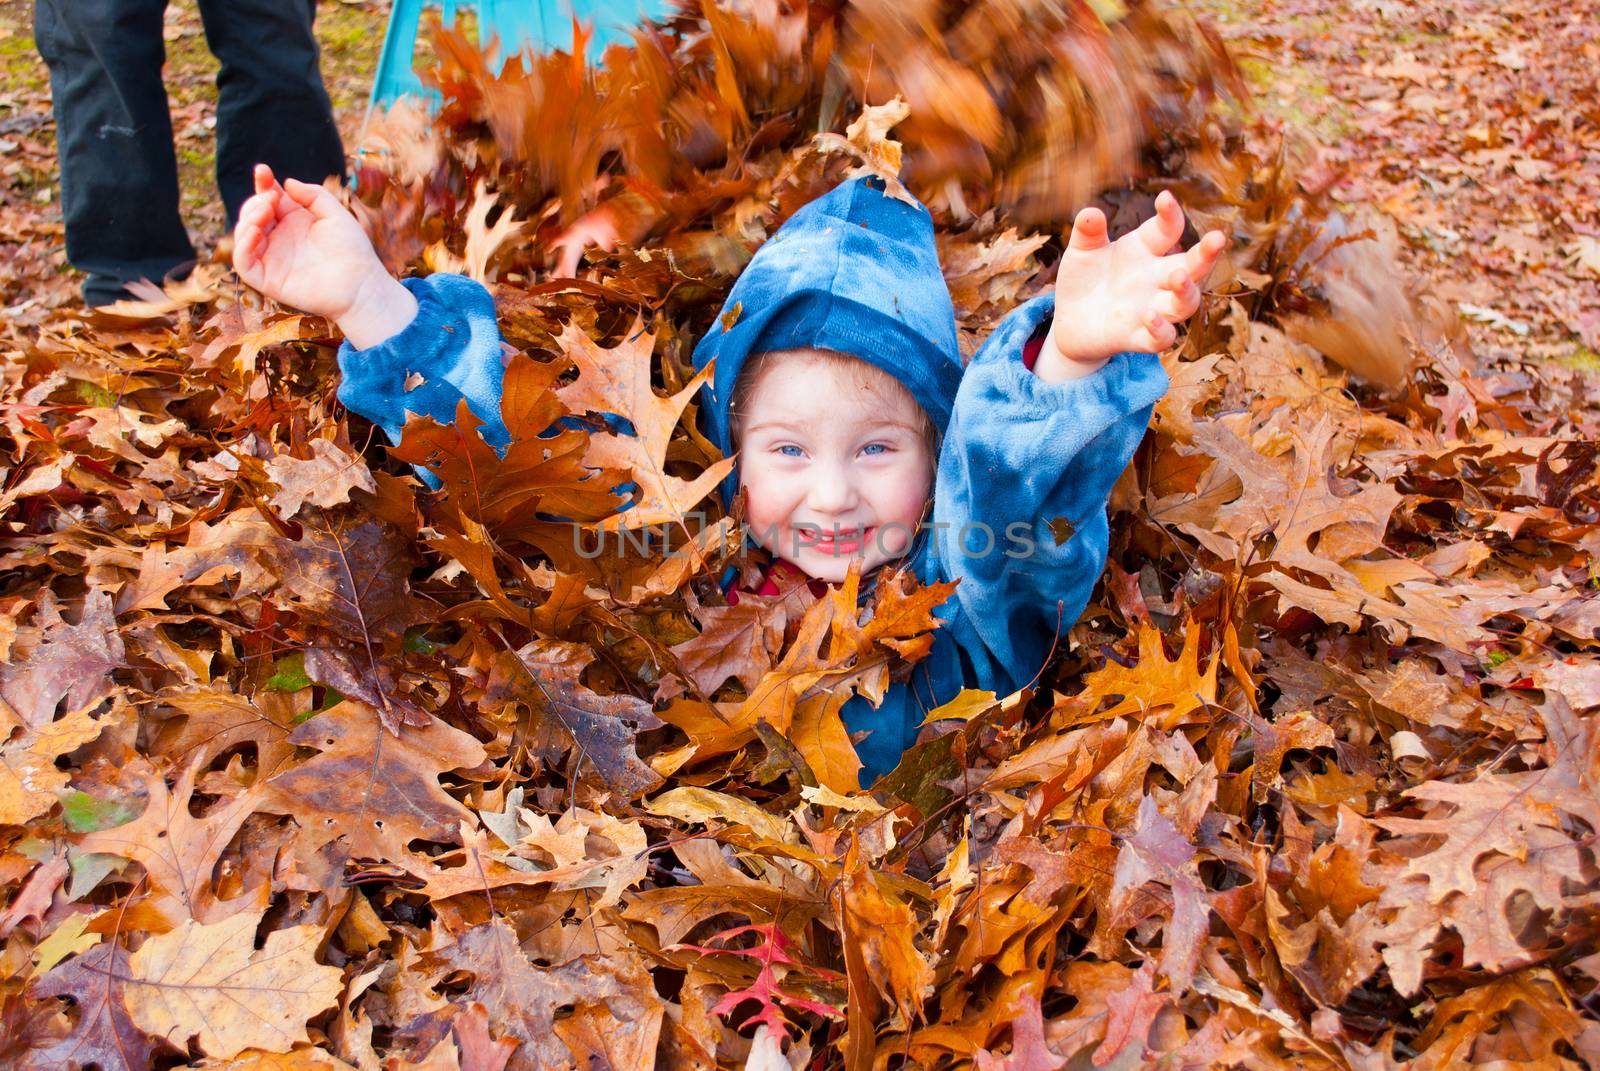 A happy Litle girl enjoying an autumn pile of raked leaves outside day